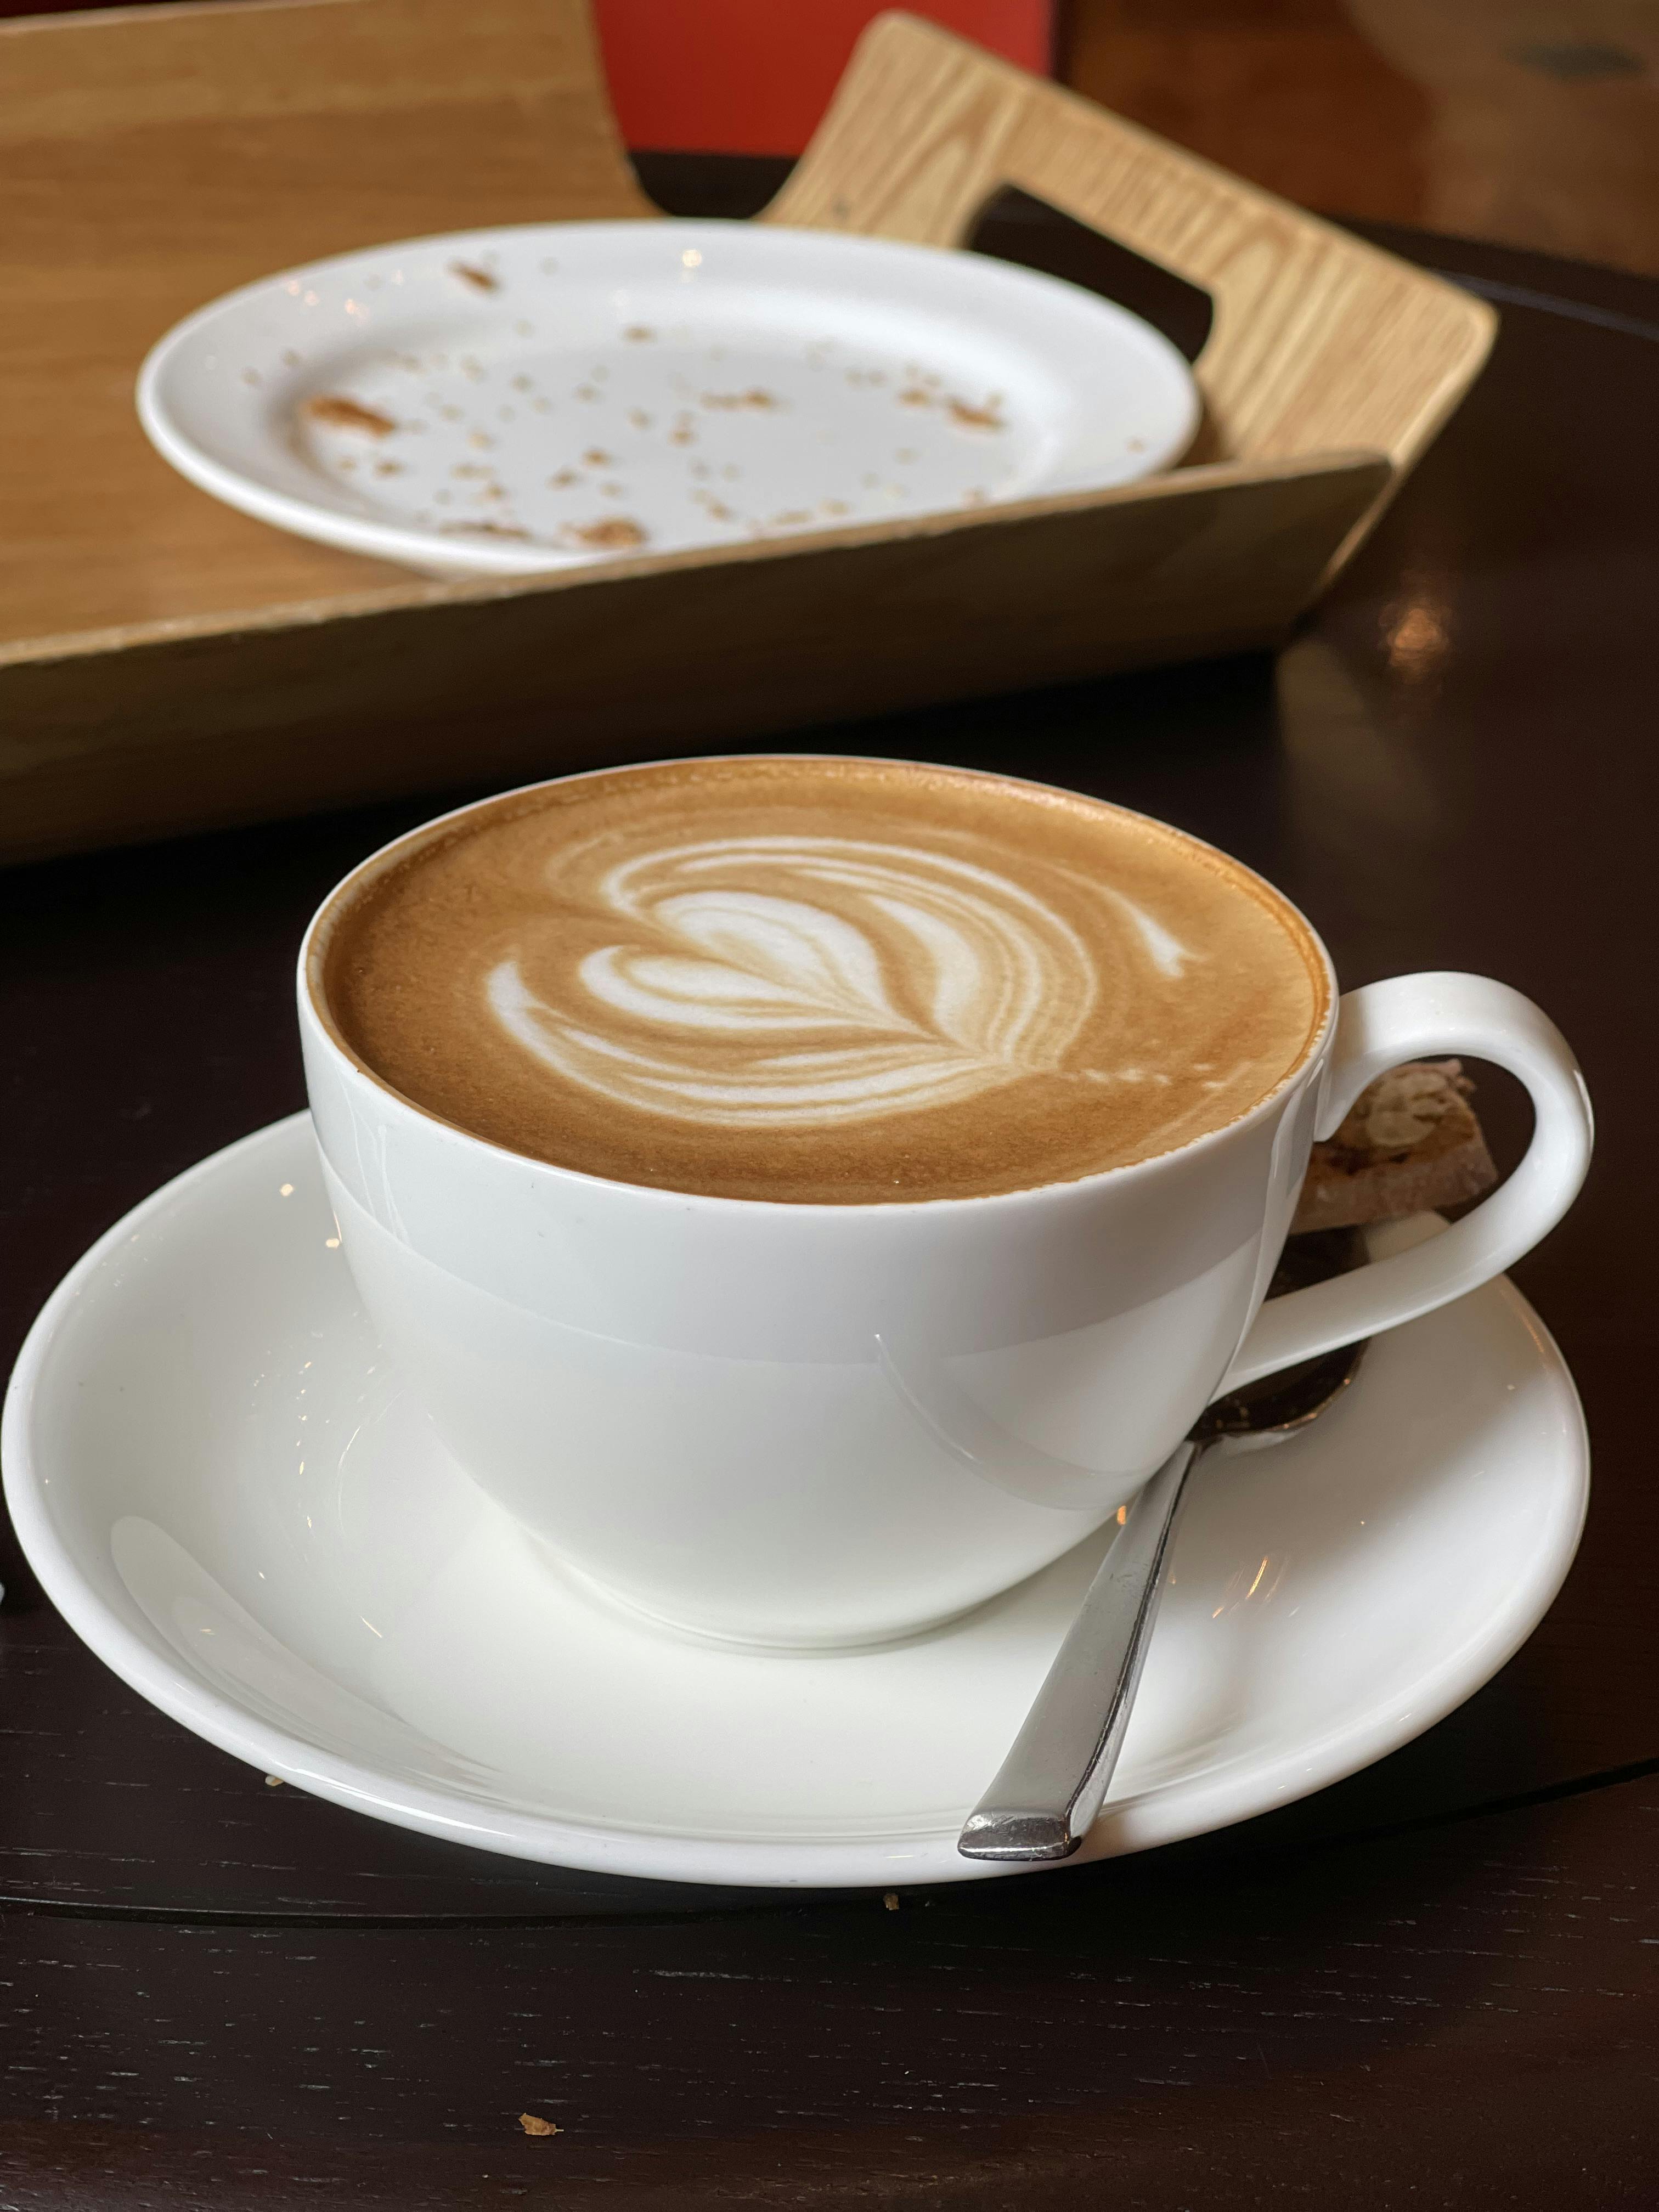 A cappuccino at Dolcetto, in The Regency, Singapore